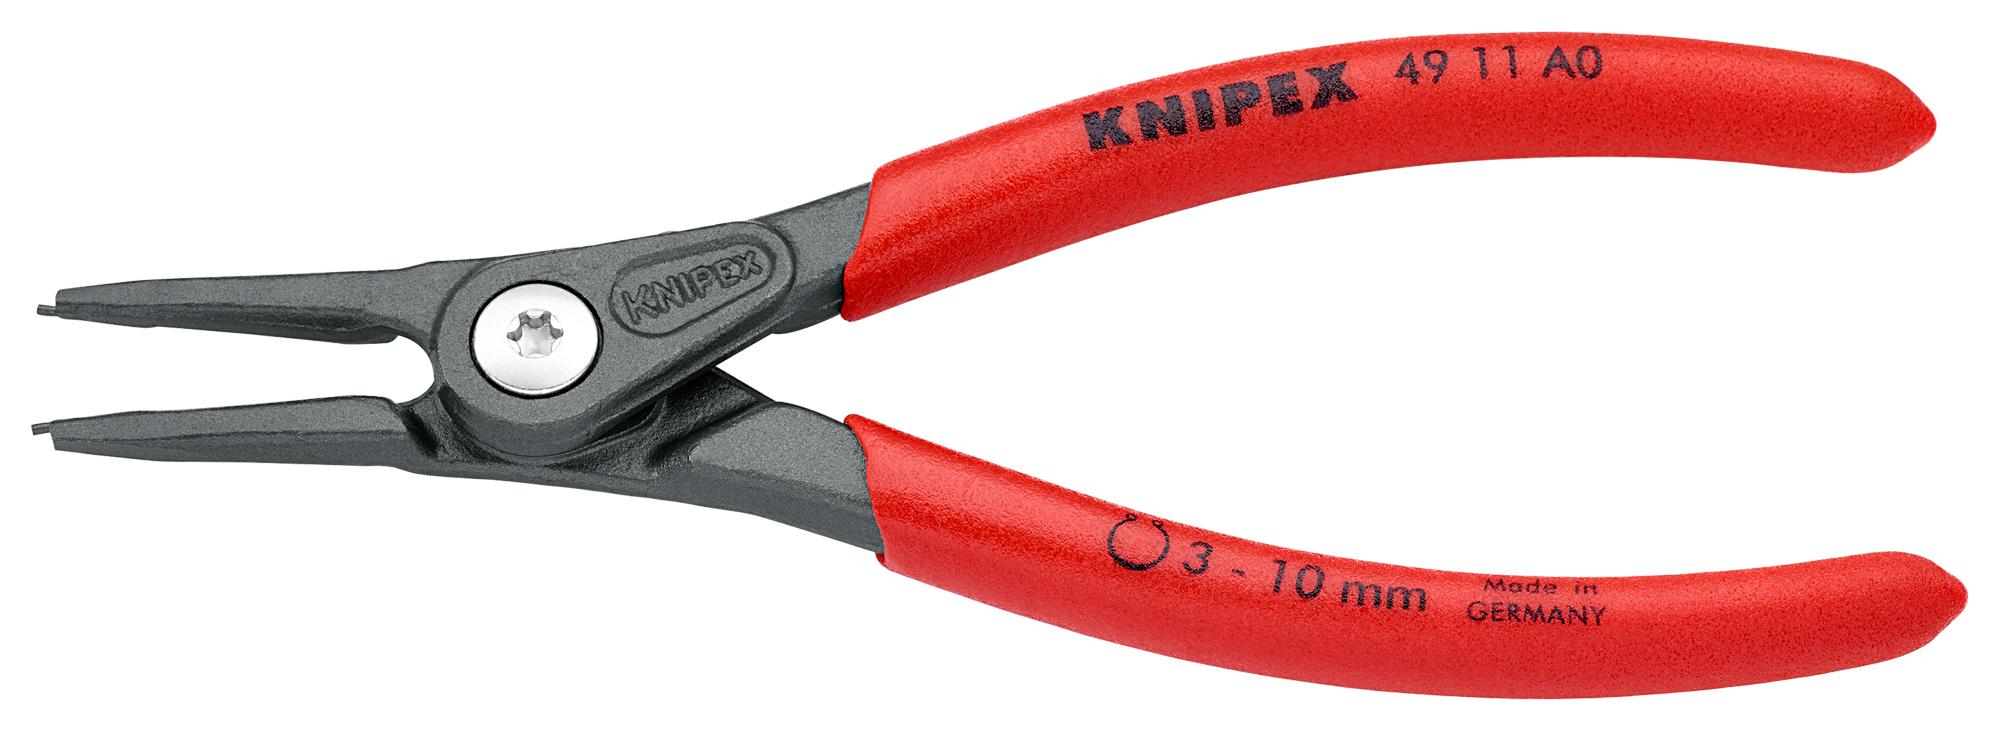 49 11 A0 CIRCLIP PLIER, EXT, STRAIGHT KNIPEX